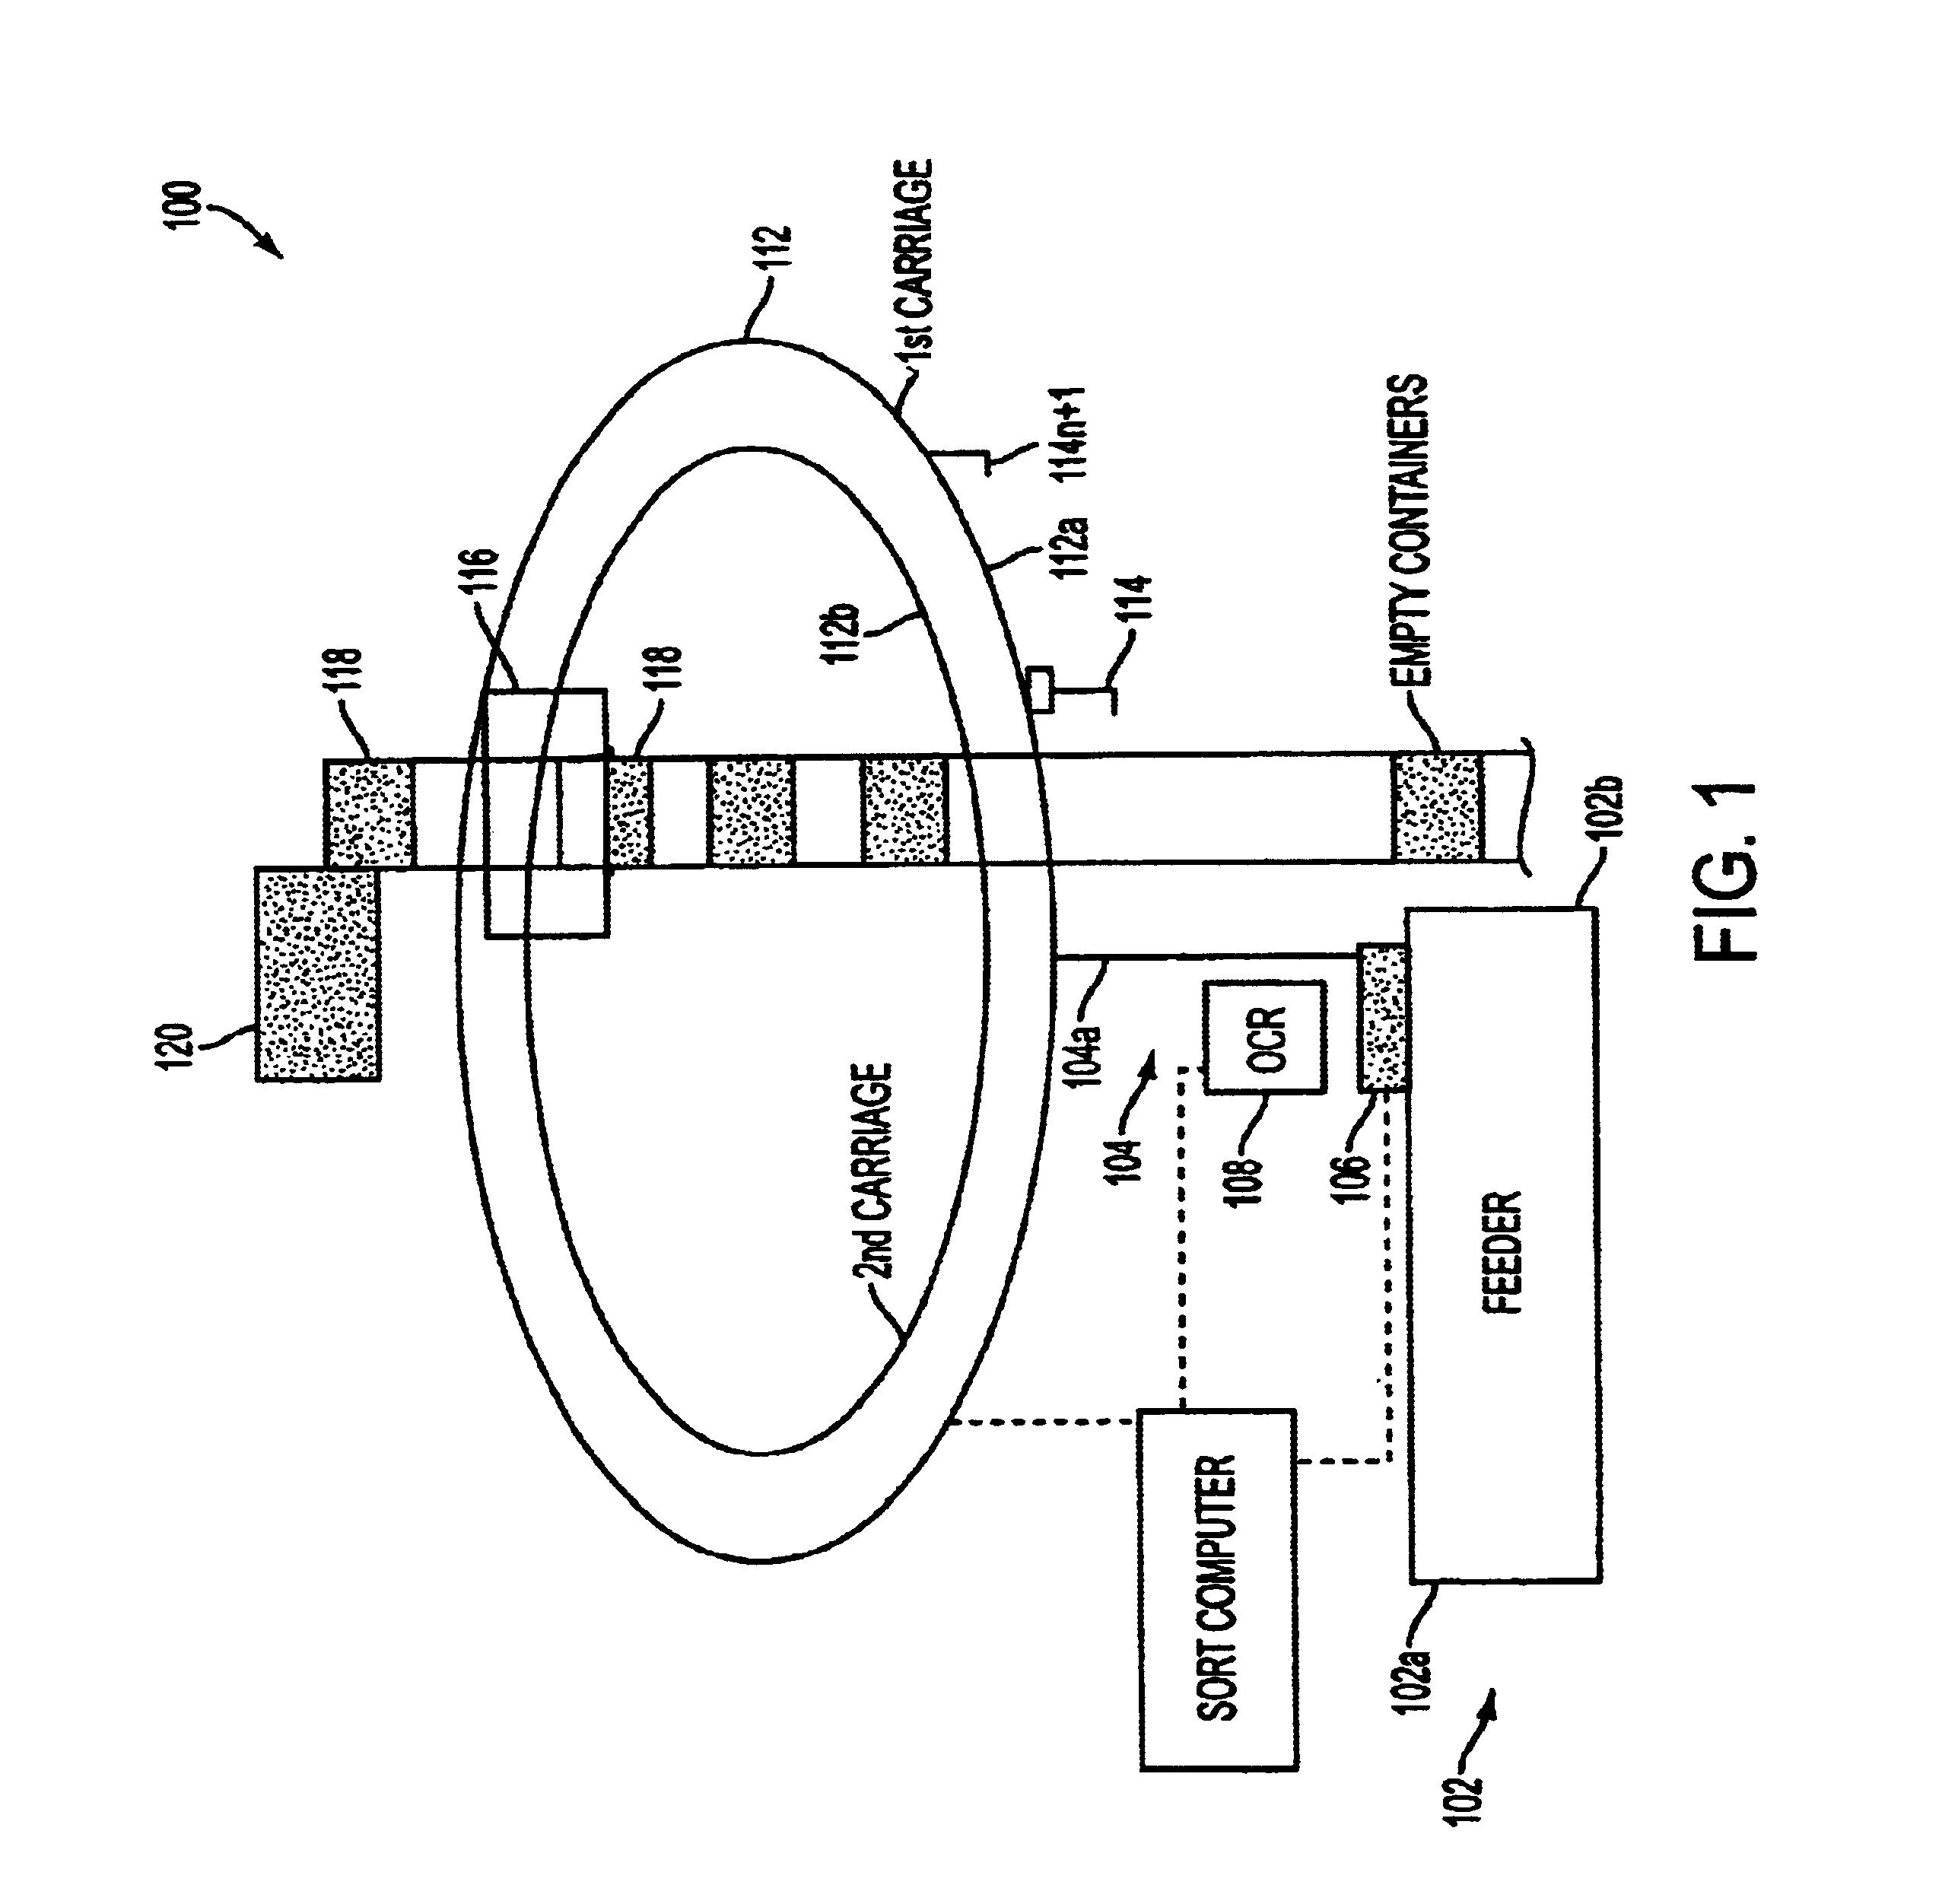 Method for sequentially ordering objects using a single pass delivery point process